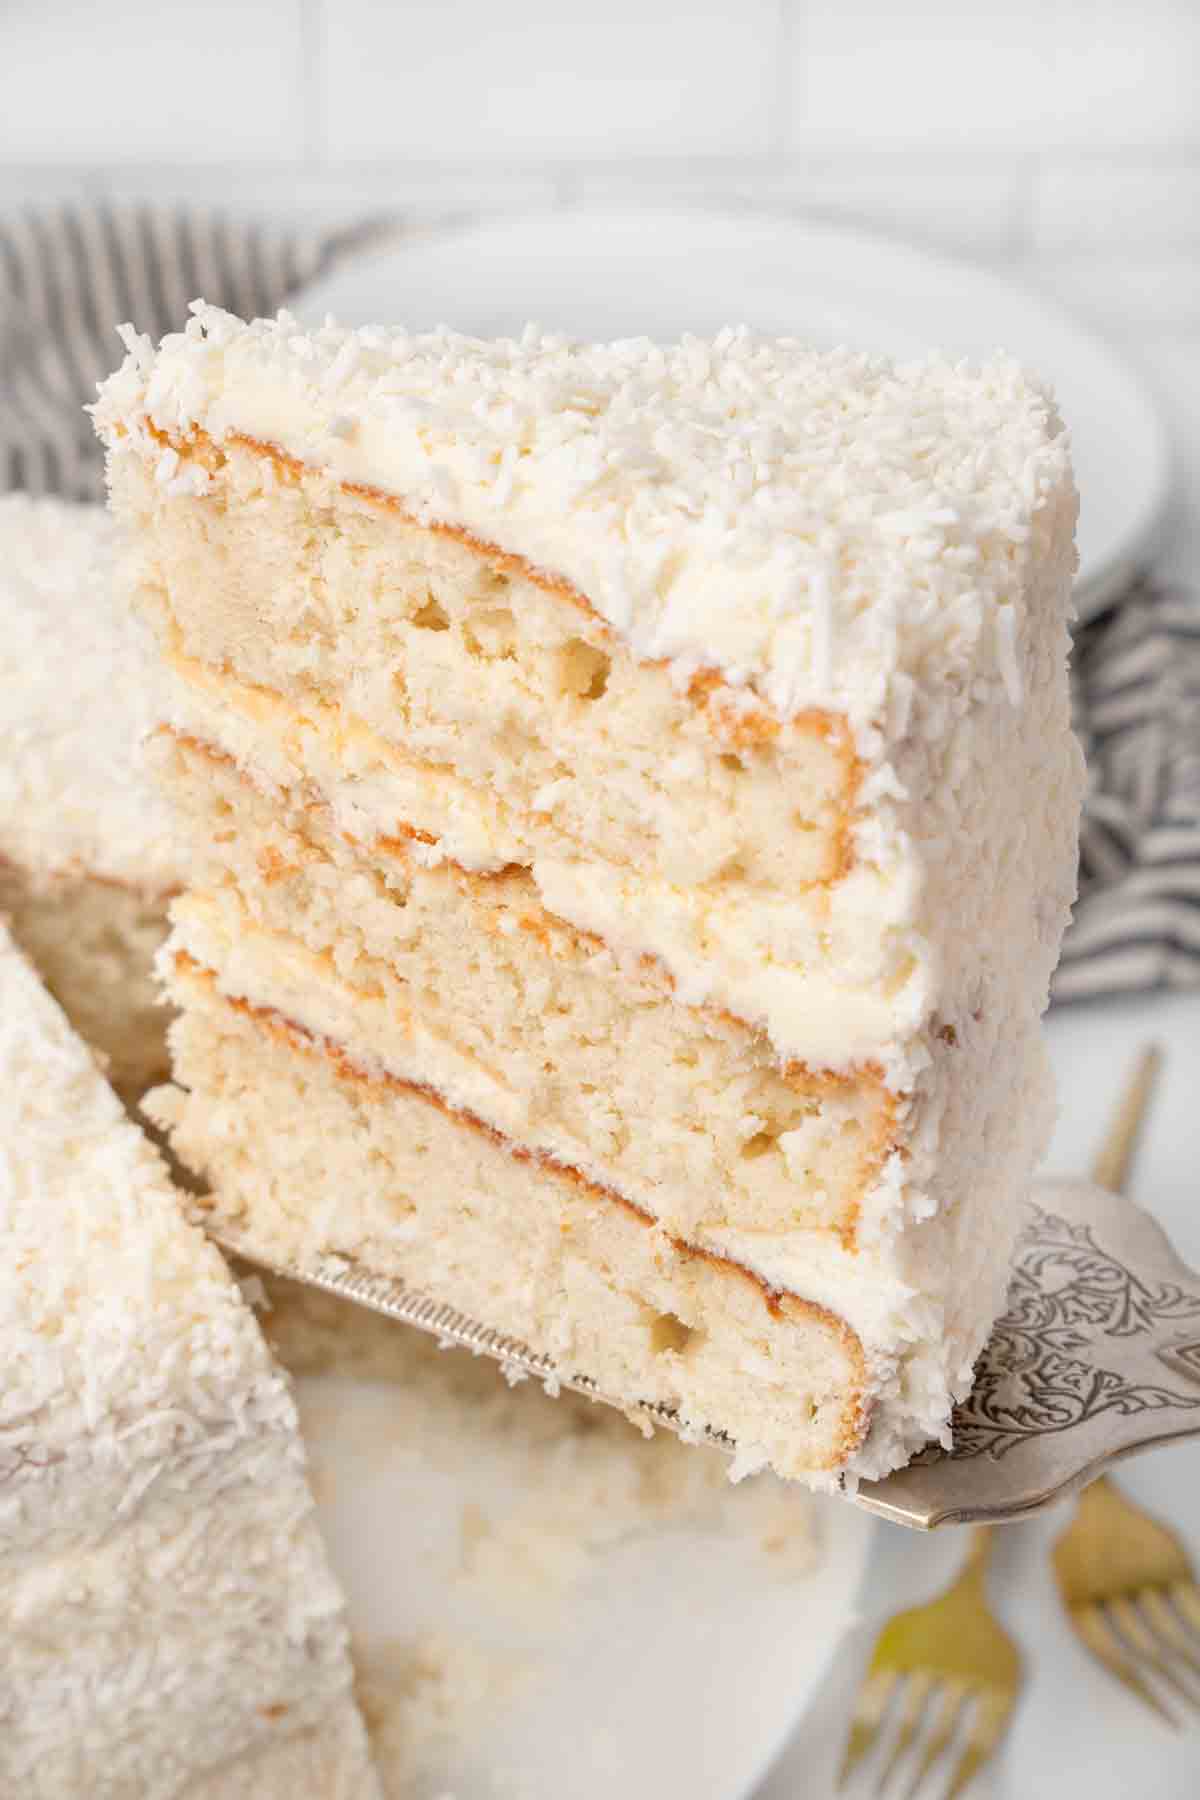 coconut cake on spatula being taken out of whole cake.